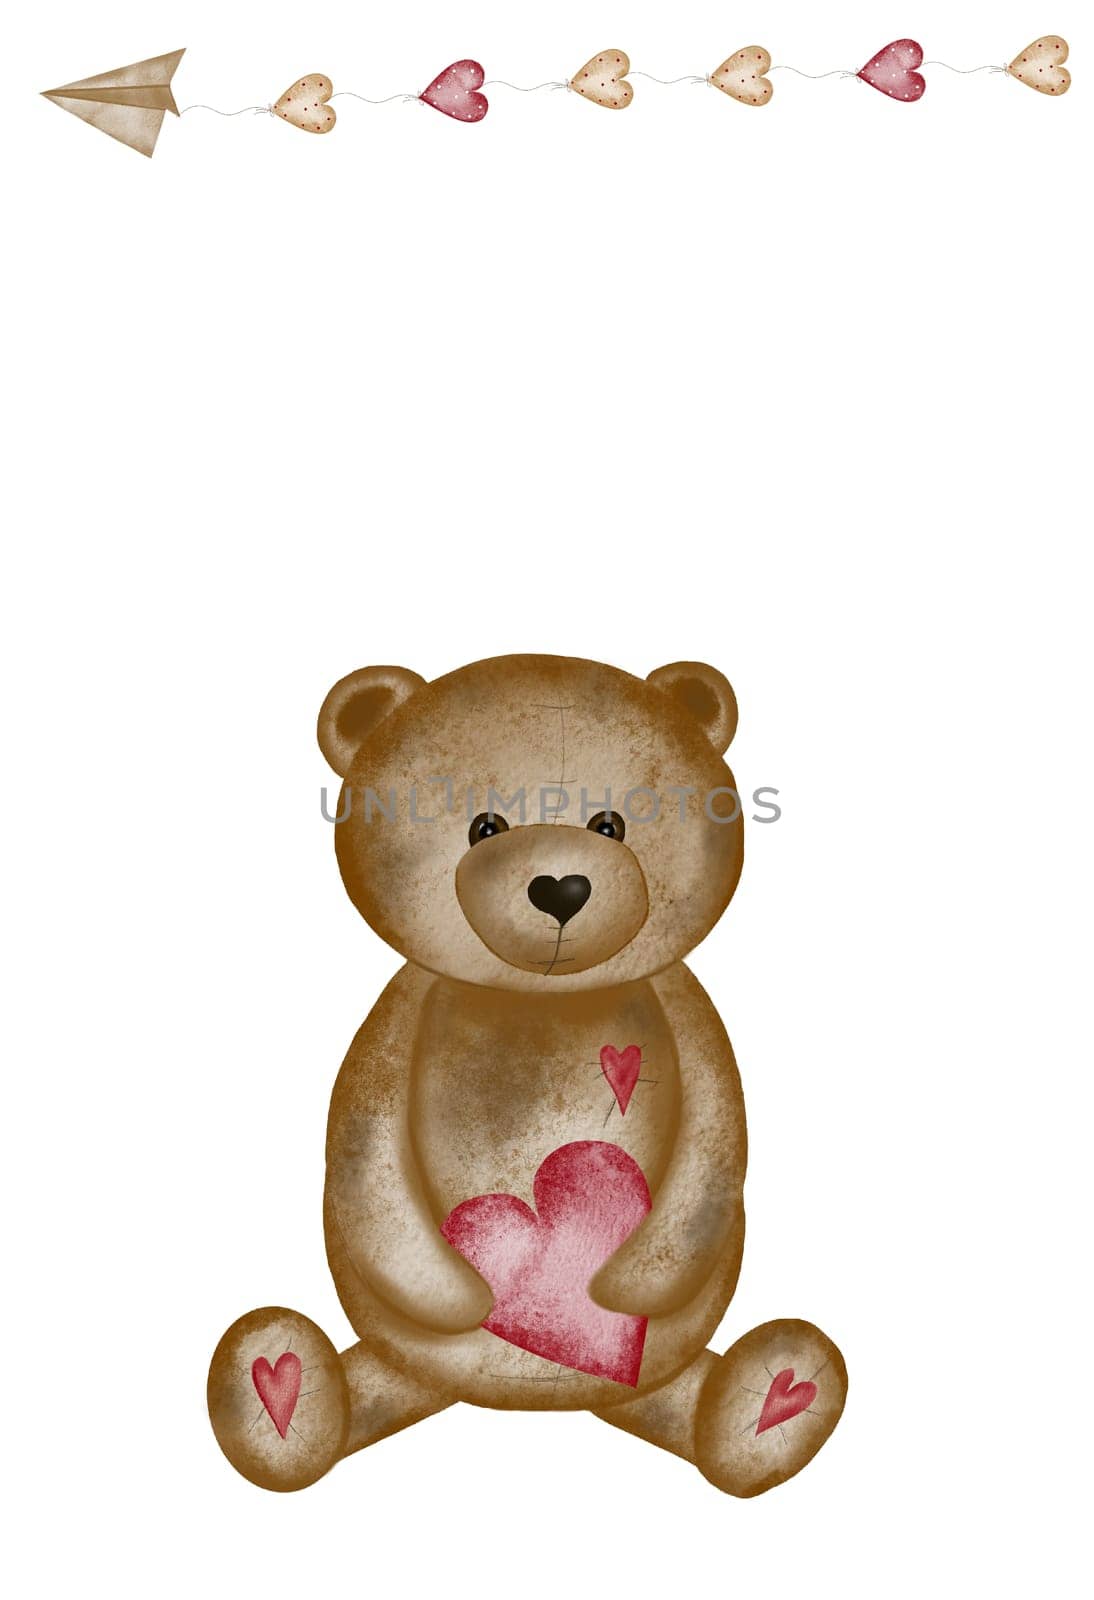 Watercolor drawing of a cute bear with a heart. Valentine's day card template with cute teddy bear. Holiday card for loved ones by TatyanaTrushcheleva